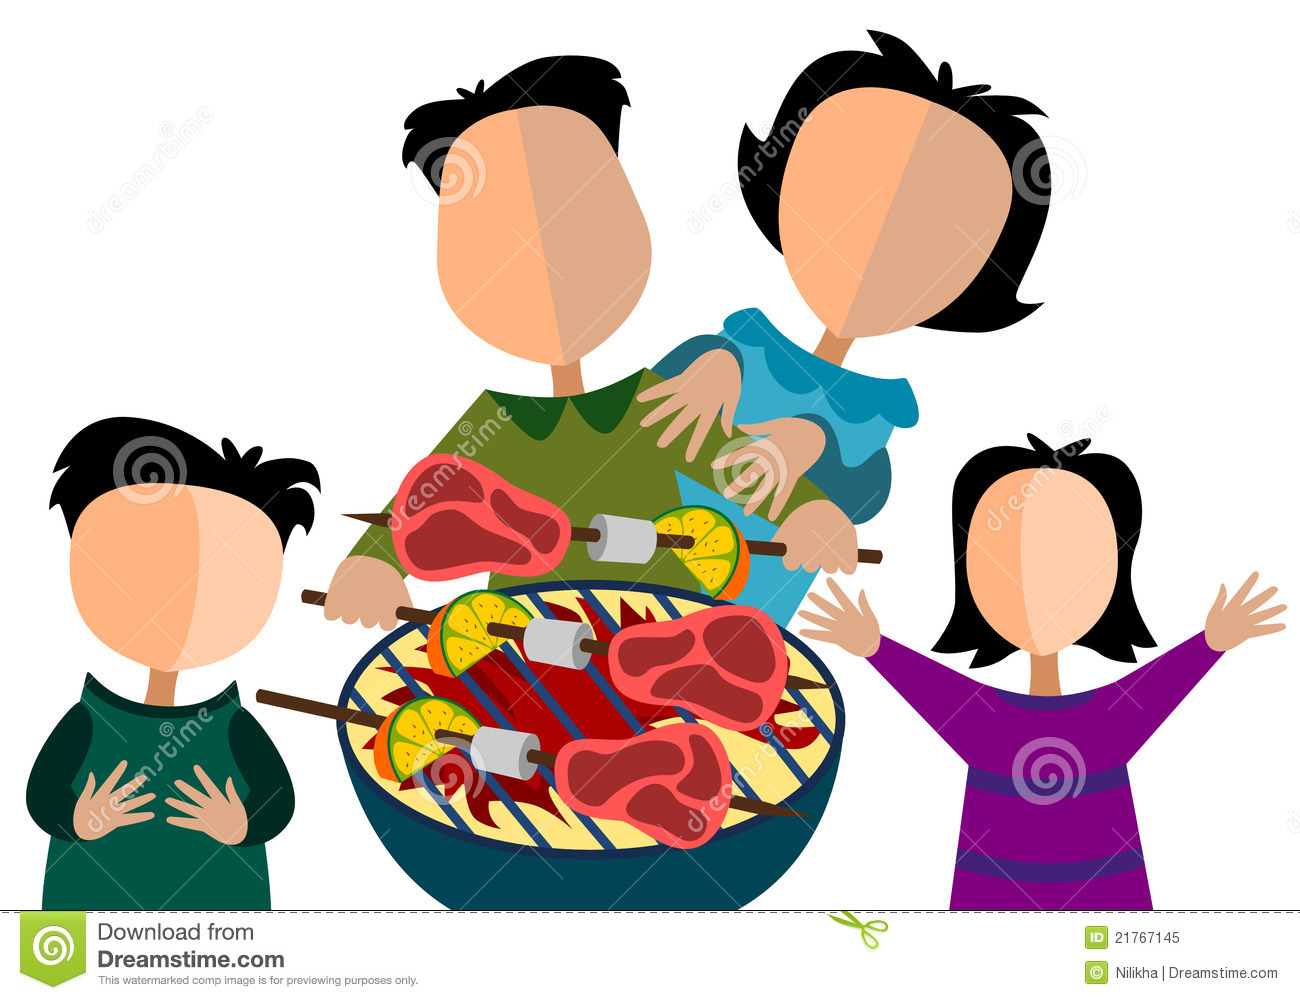 Family Meal Clip Art 19226 Hd Wallpapers Widescreen in Food n ...